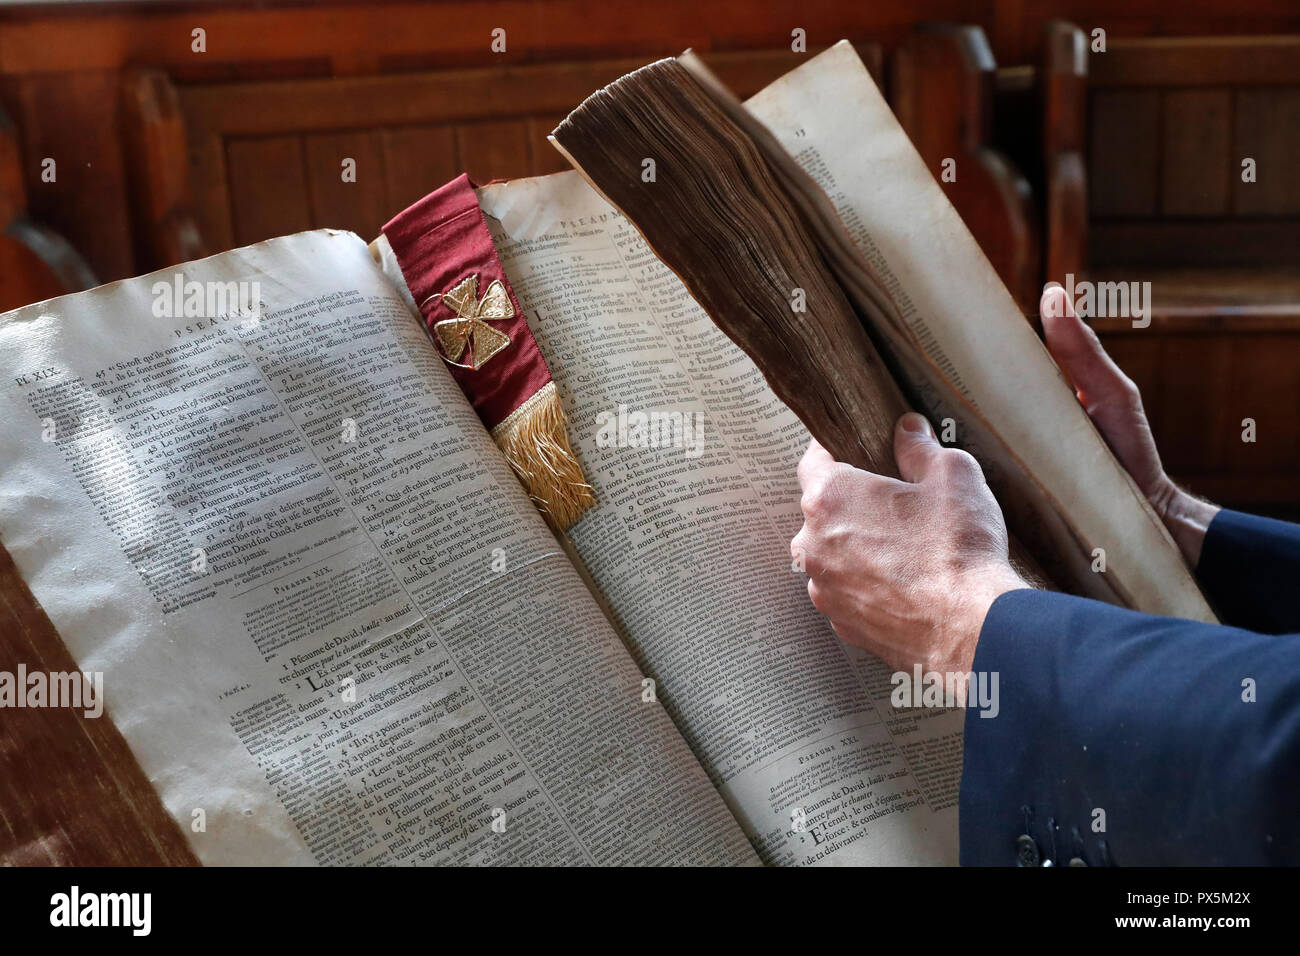 Old bible in French, 1669. Man reading the bible. Stock Photo